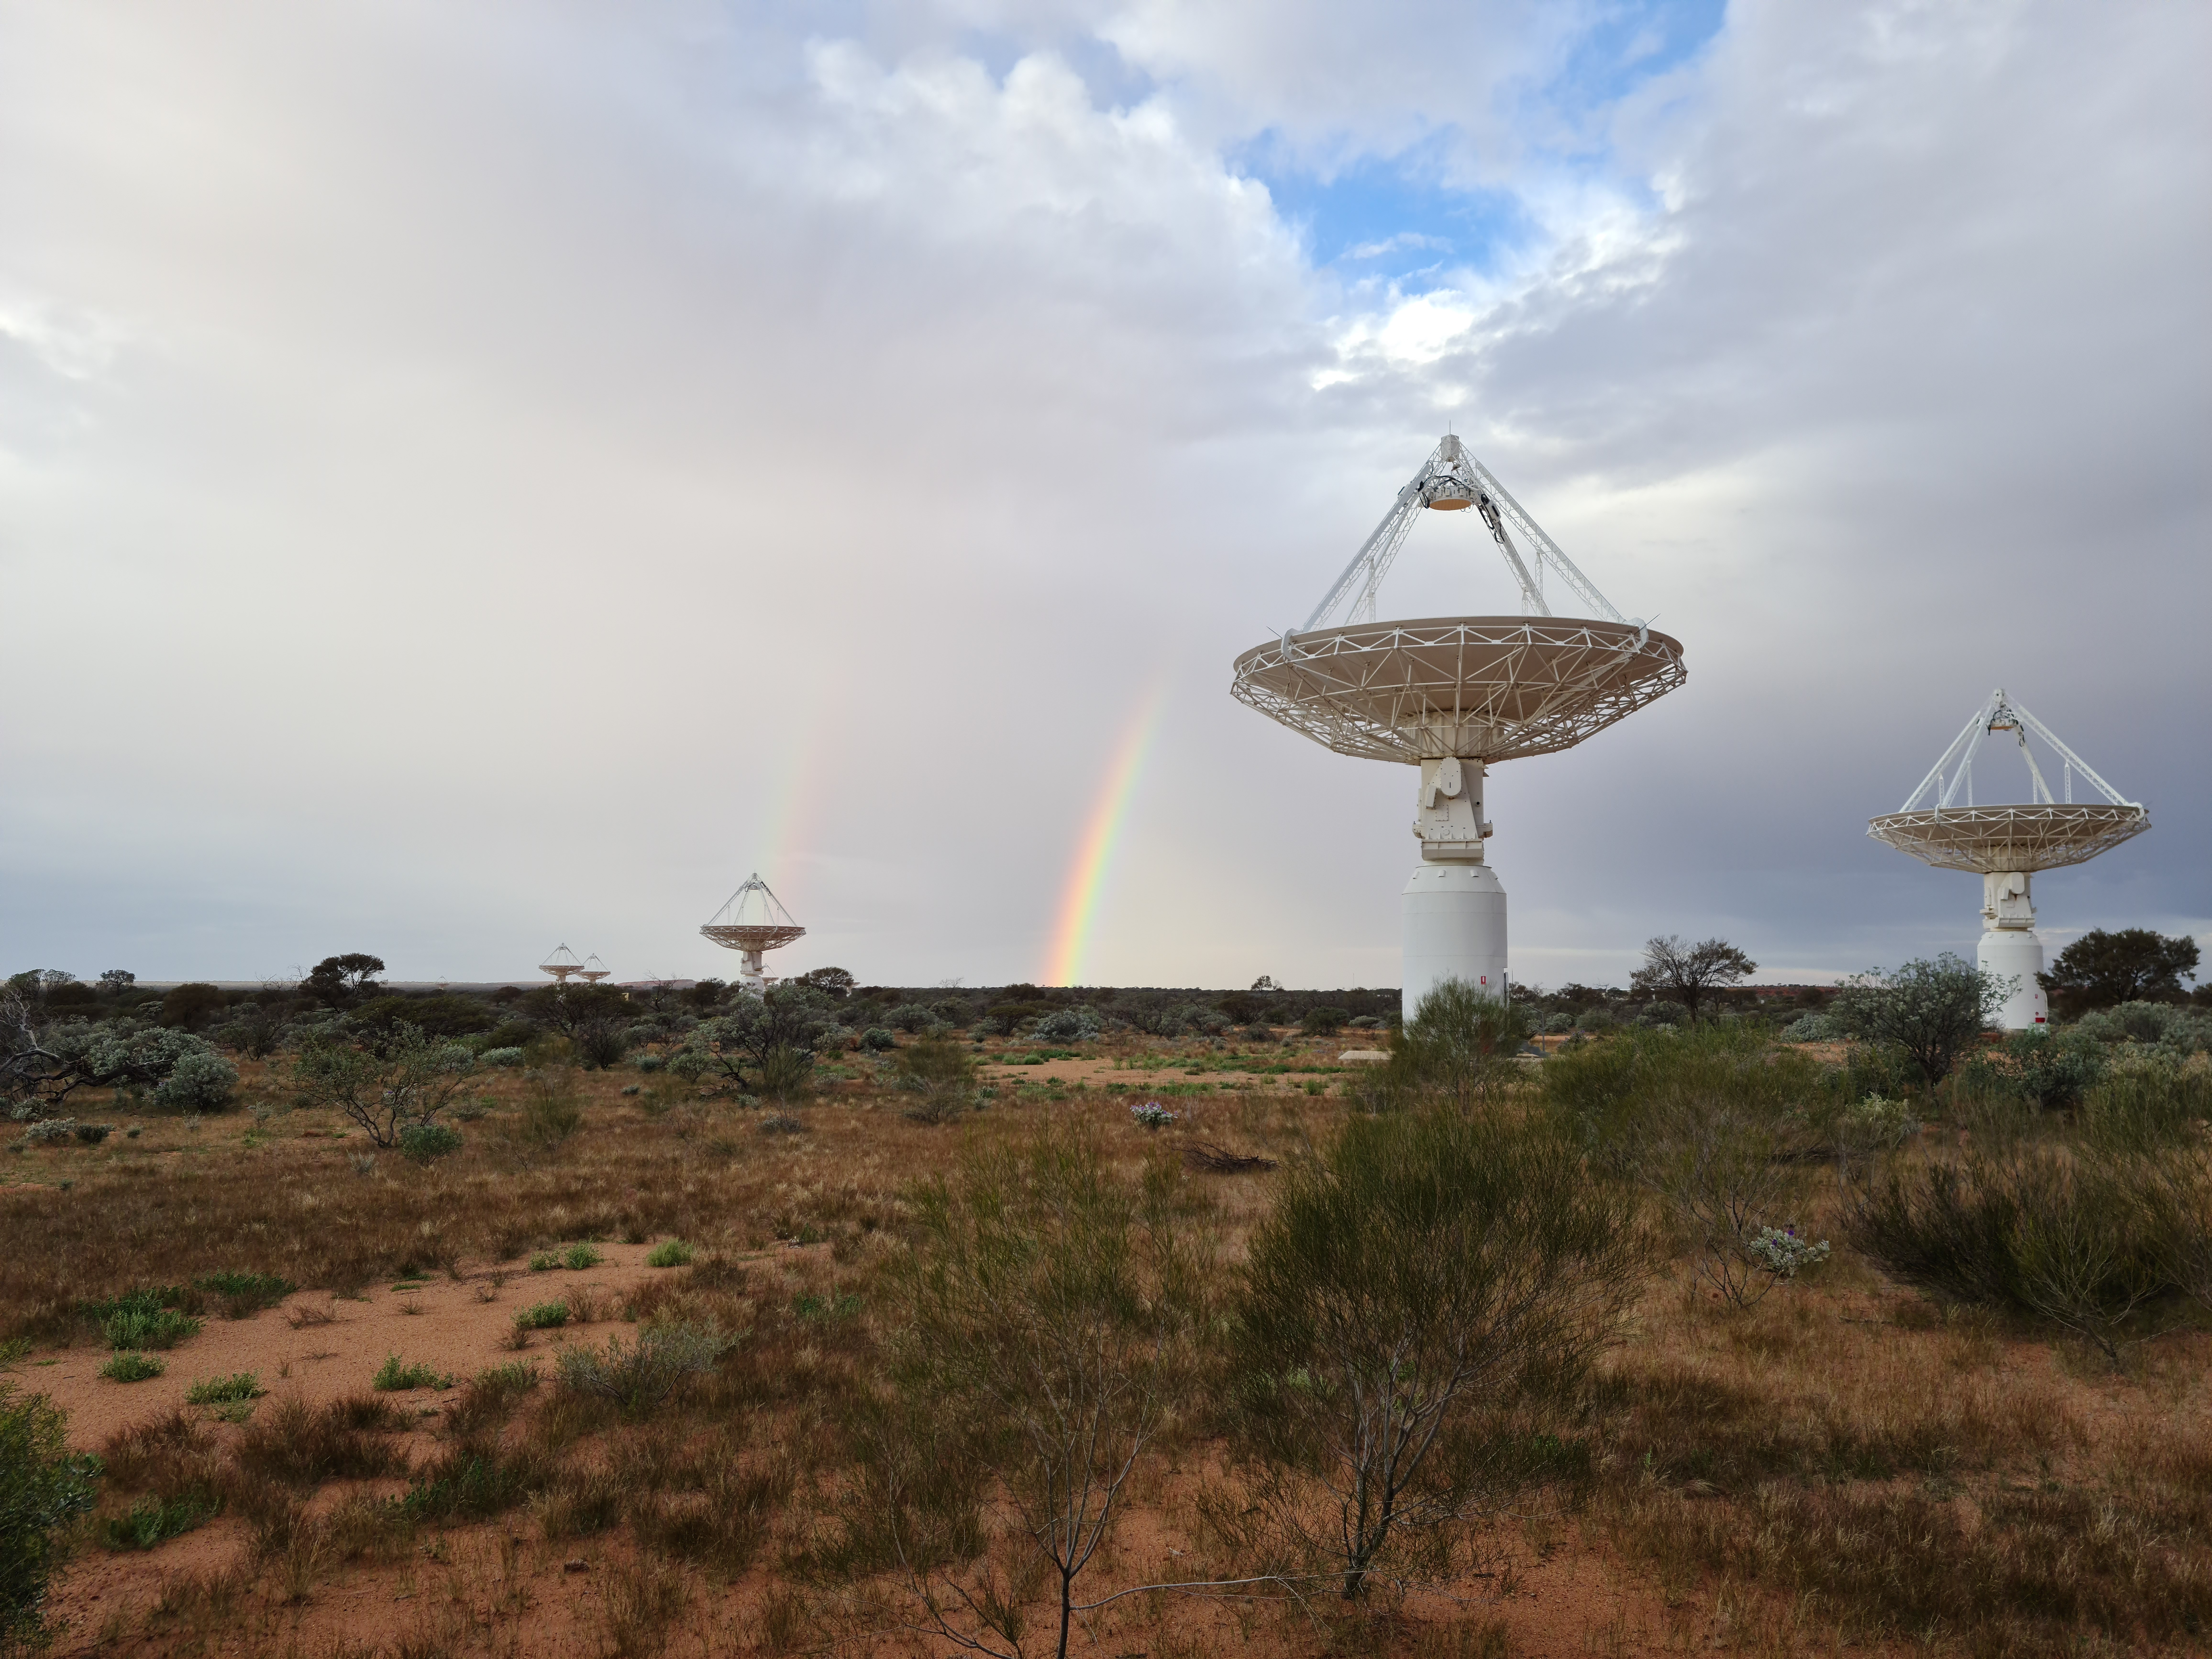 Picture taken on a cloudy day has multiple large white radio telescope dishes in the foreground and a double rainbow in the background. 